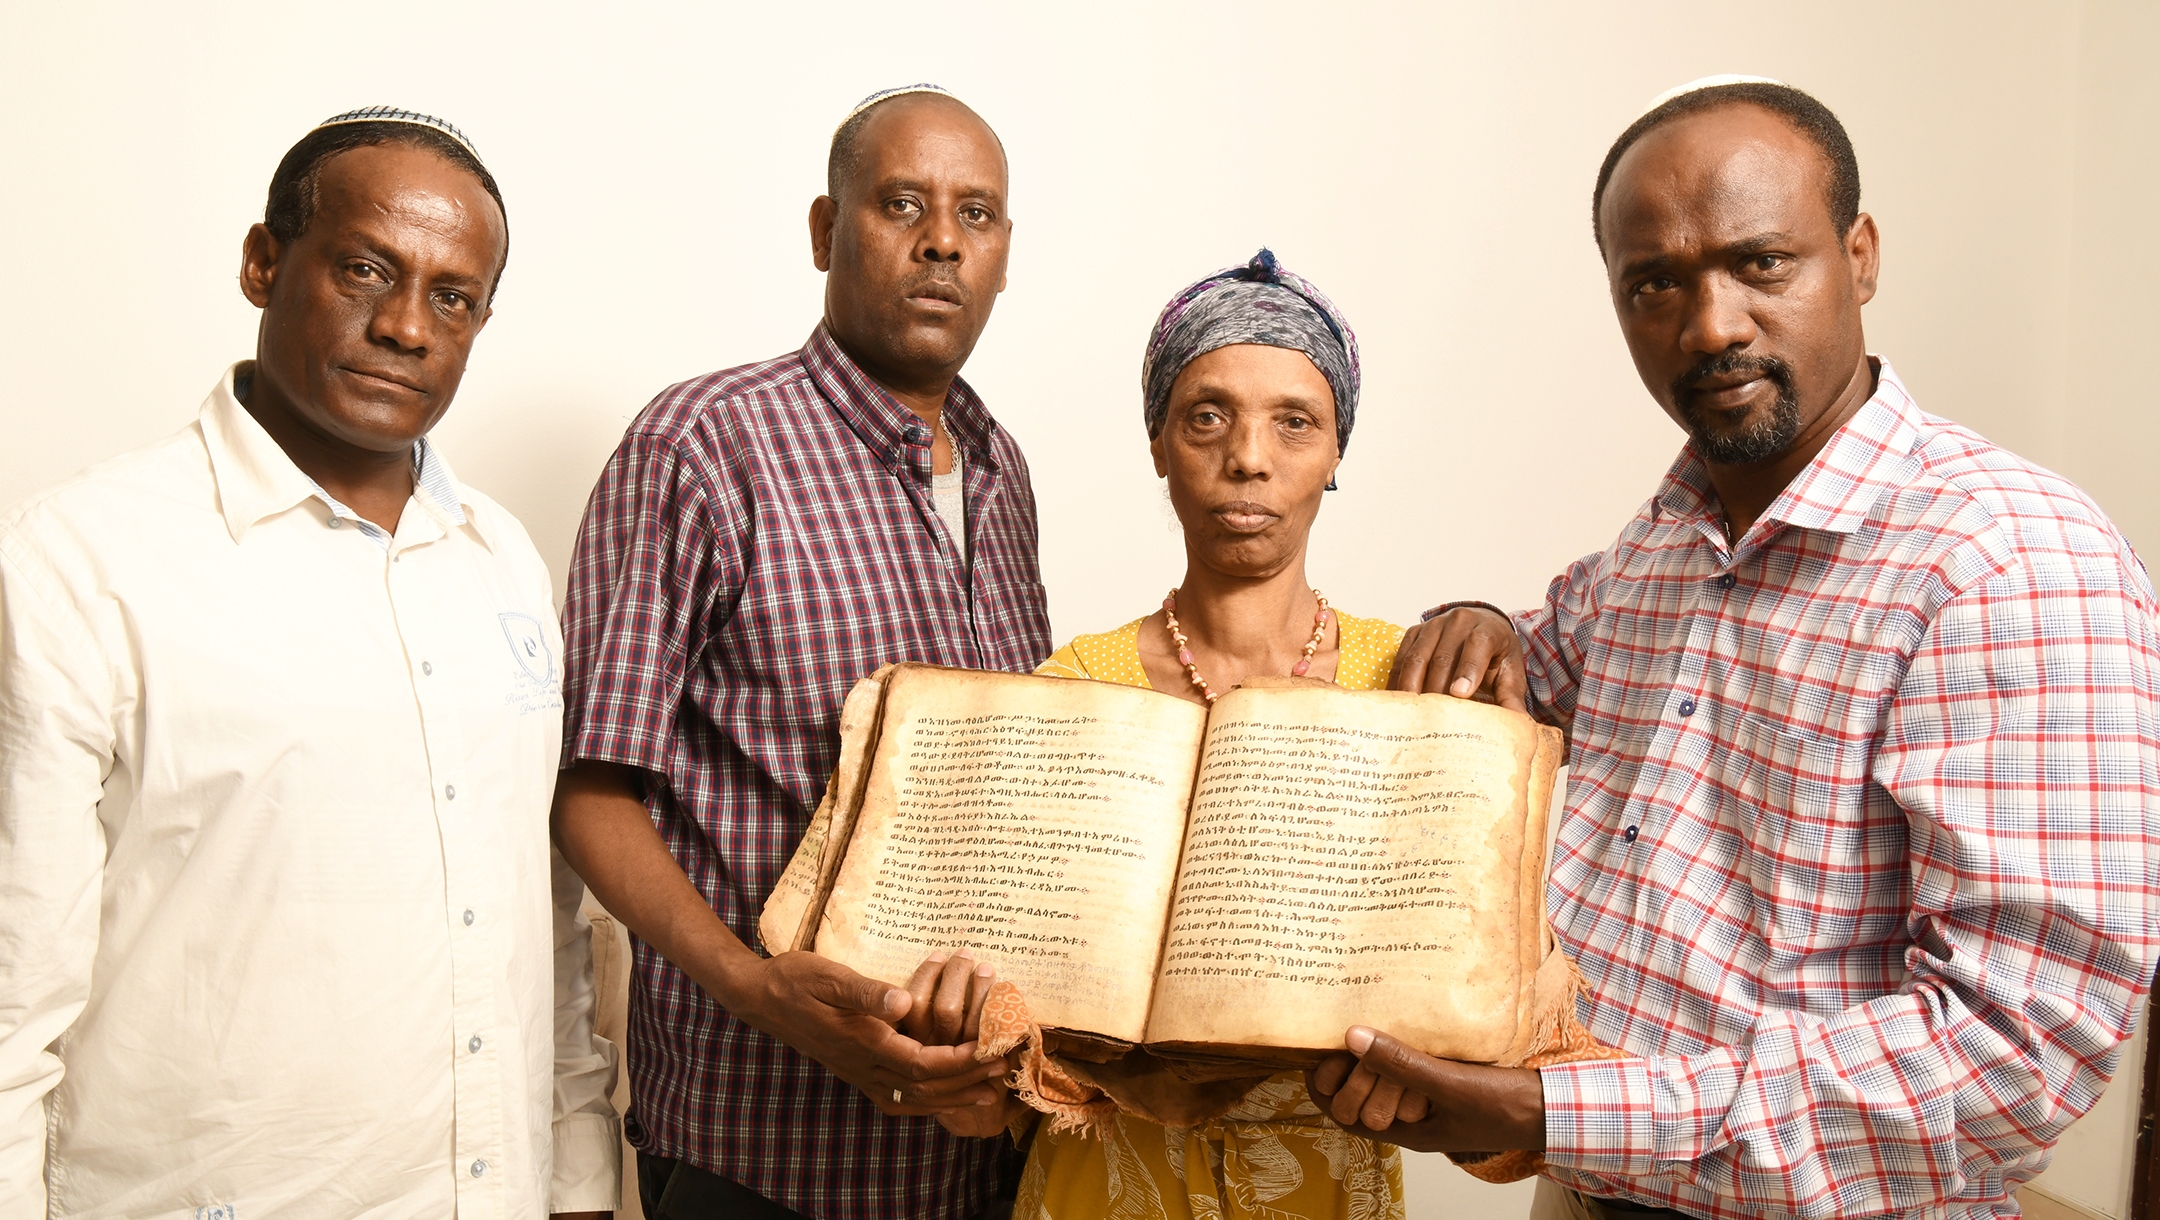 Ayanawo Ferada Senebato, right, and his family shown in Ashkelon, Israel, holding an ancient Orit book that they retrieved near Gondar, Ethiopia, in February 2022. (Yossi Zeliger)